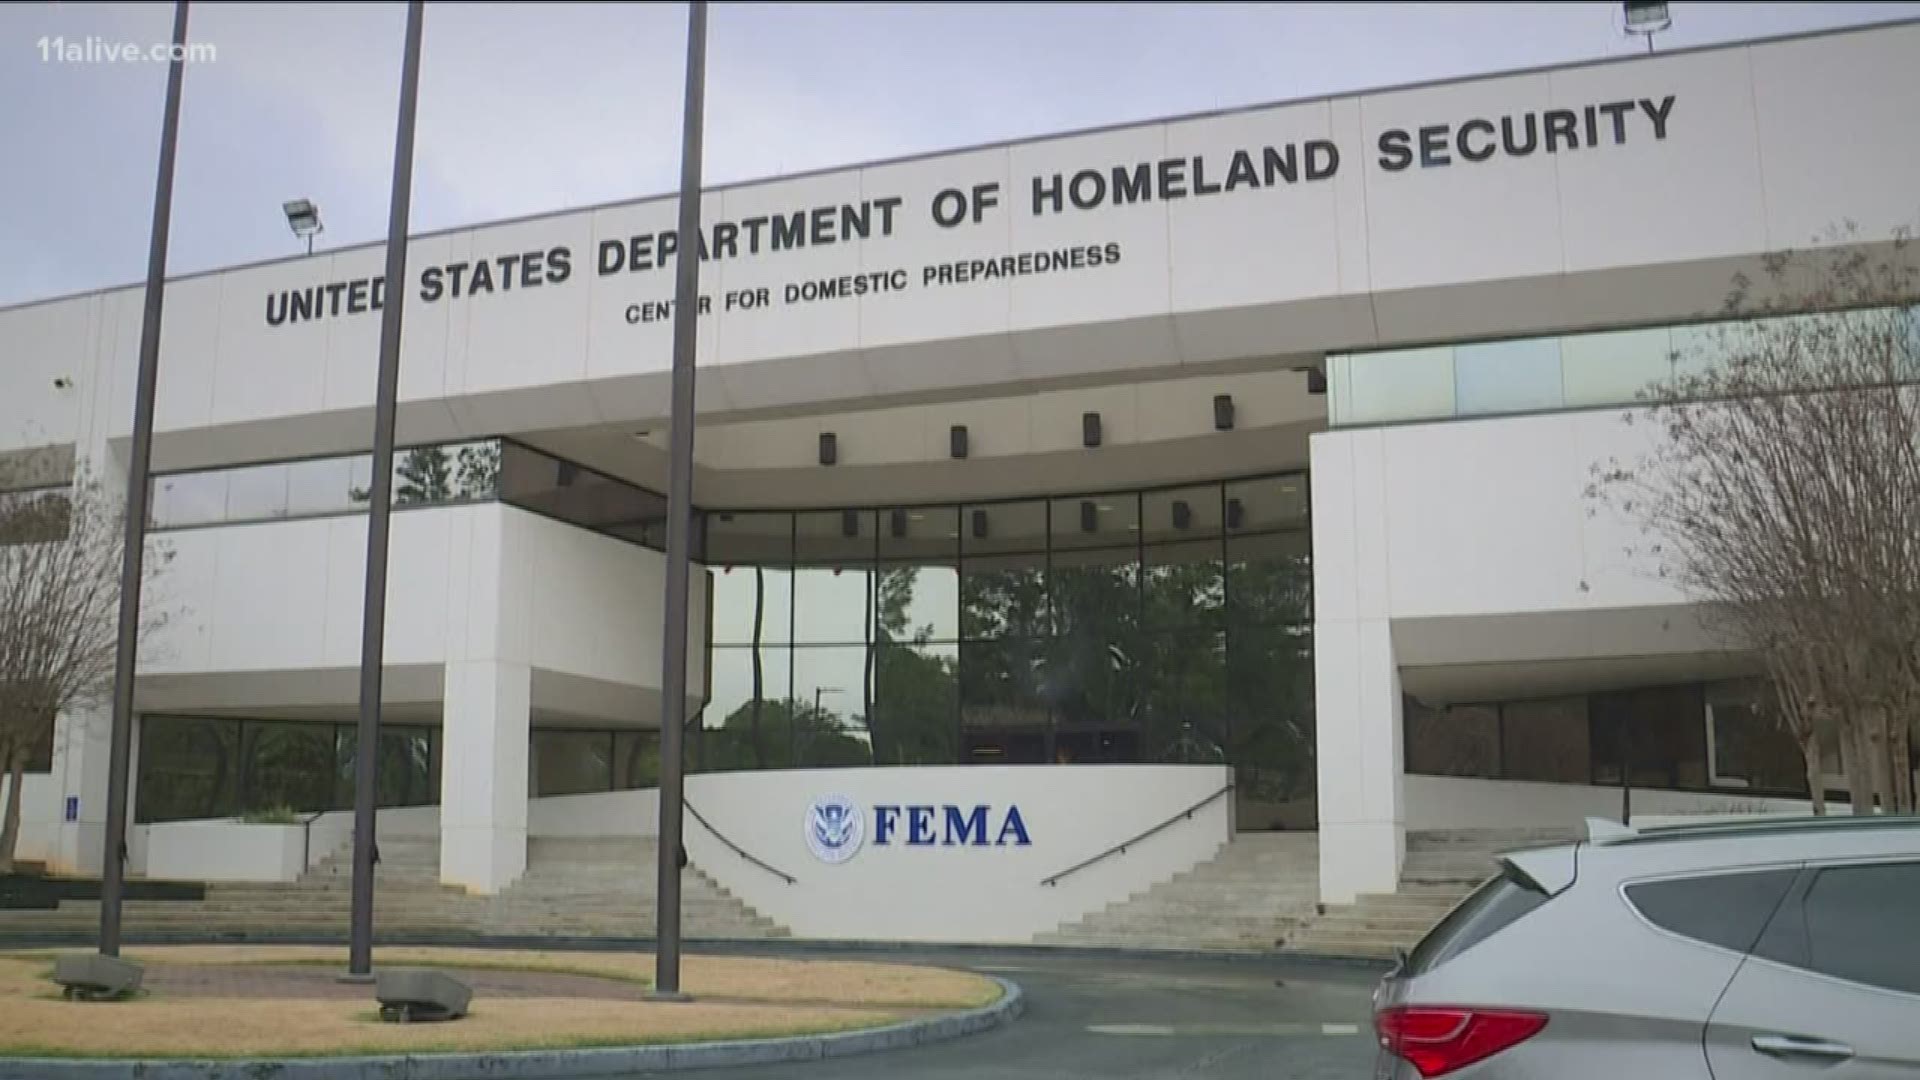 Residents of Anniston, Alabama are upset that federal officials have allegedly decided to house Americans infected with the Wuhan coronavirus there.